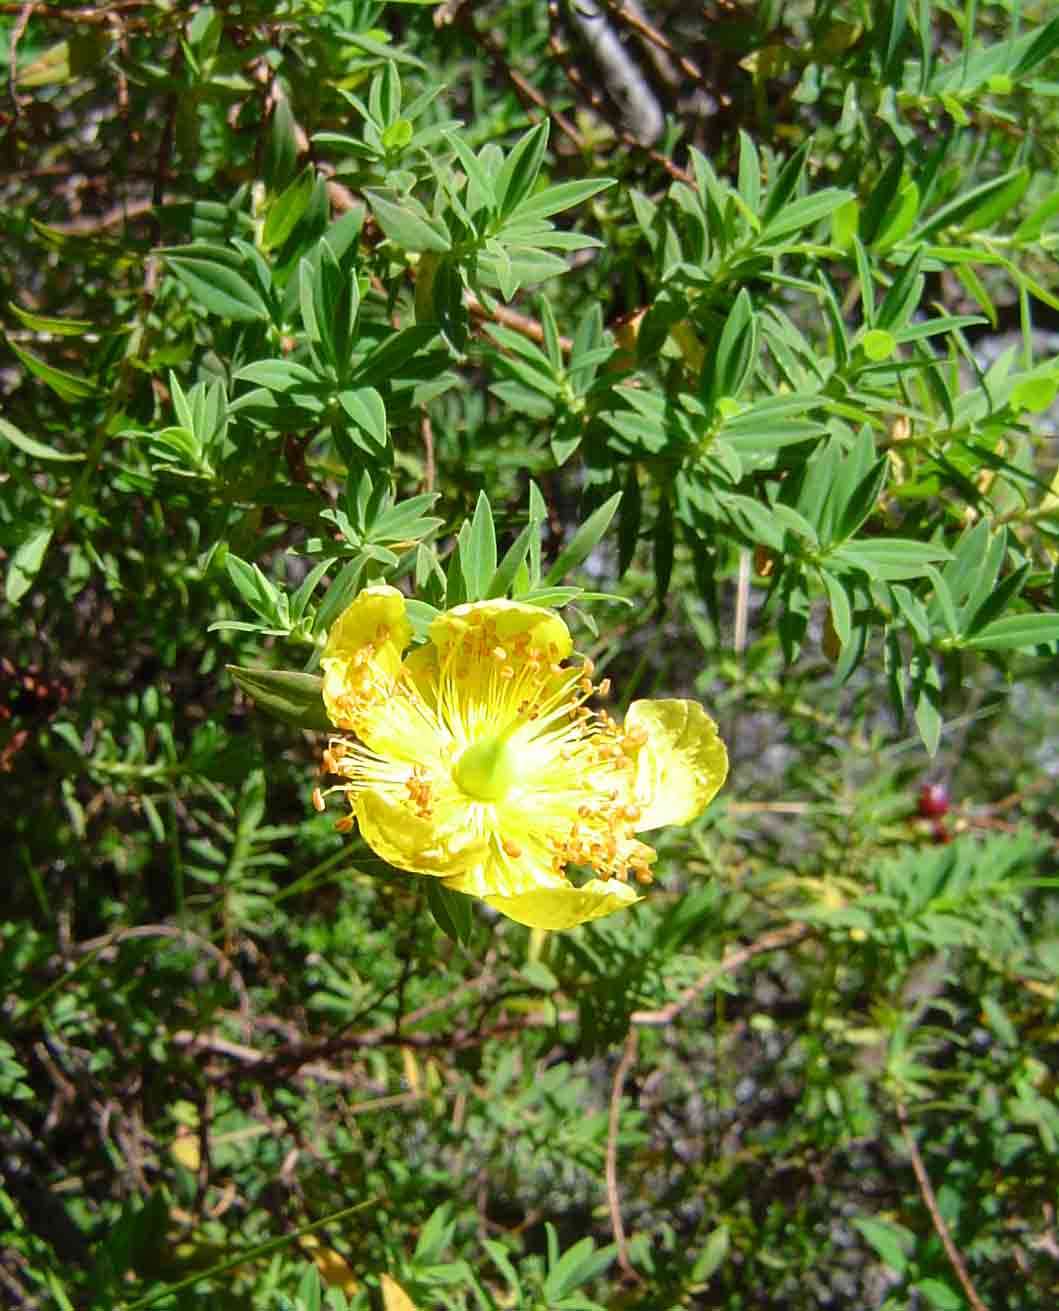 Image of Common curry bush